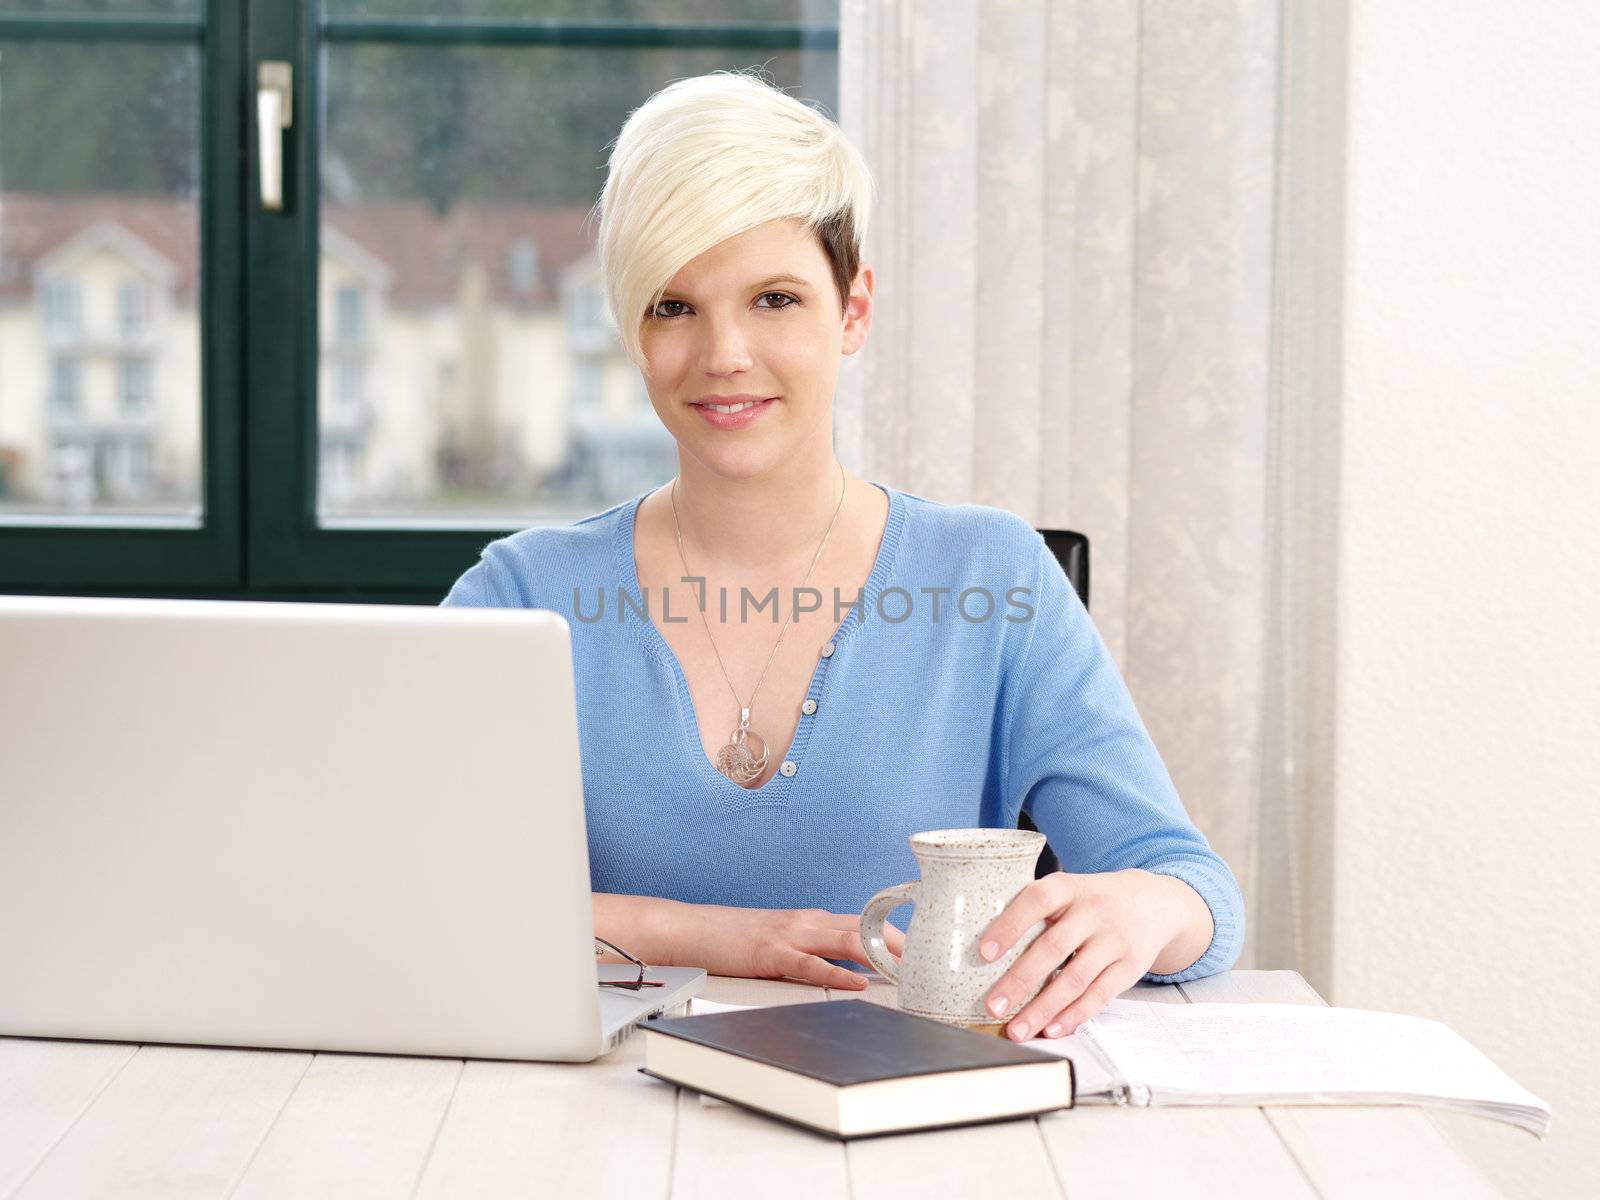 Photo of a beautiful blond female working in an office on a laptop and writing in a notebook.